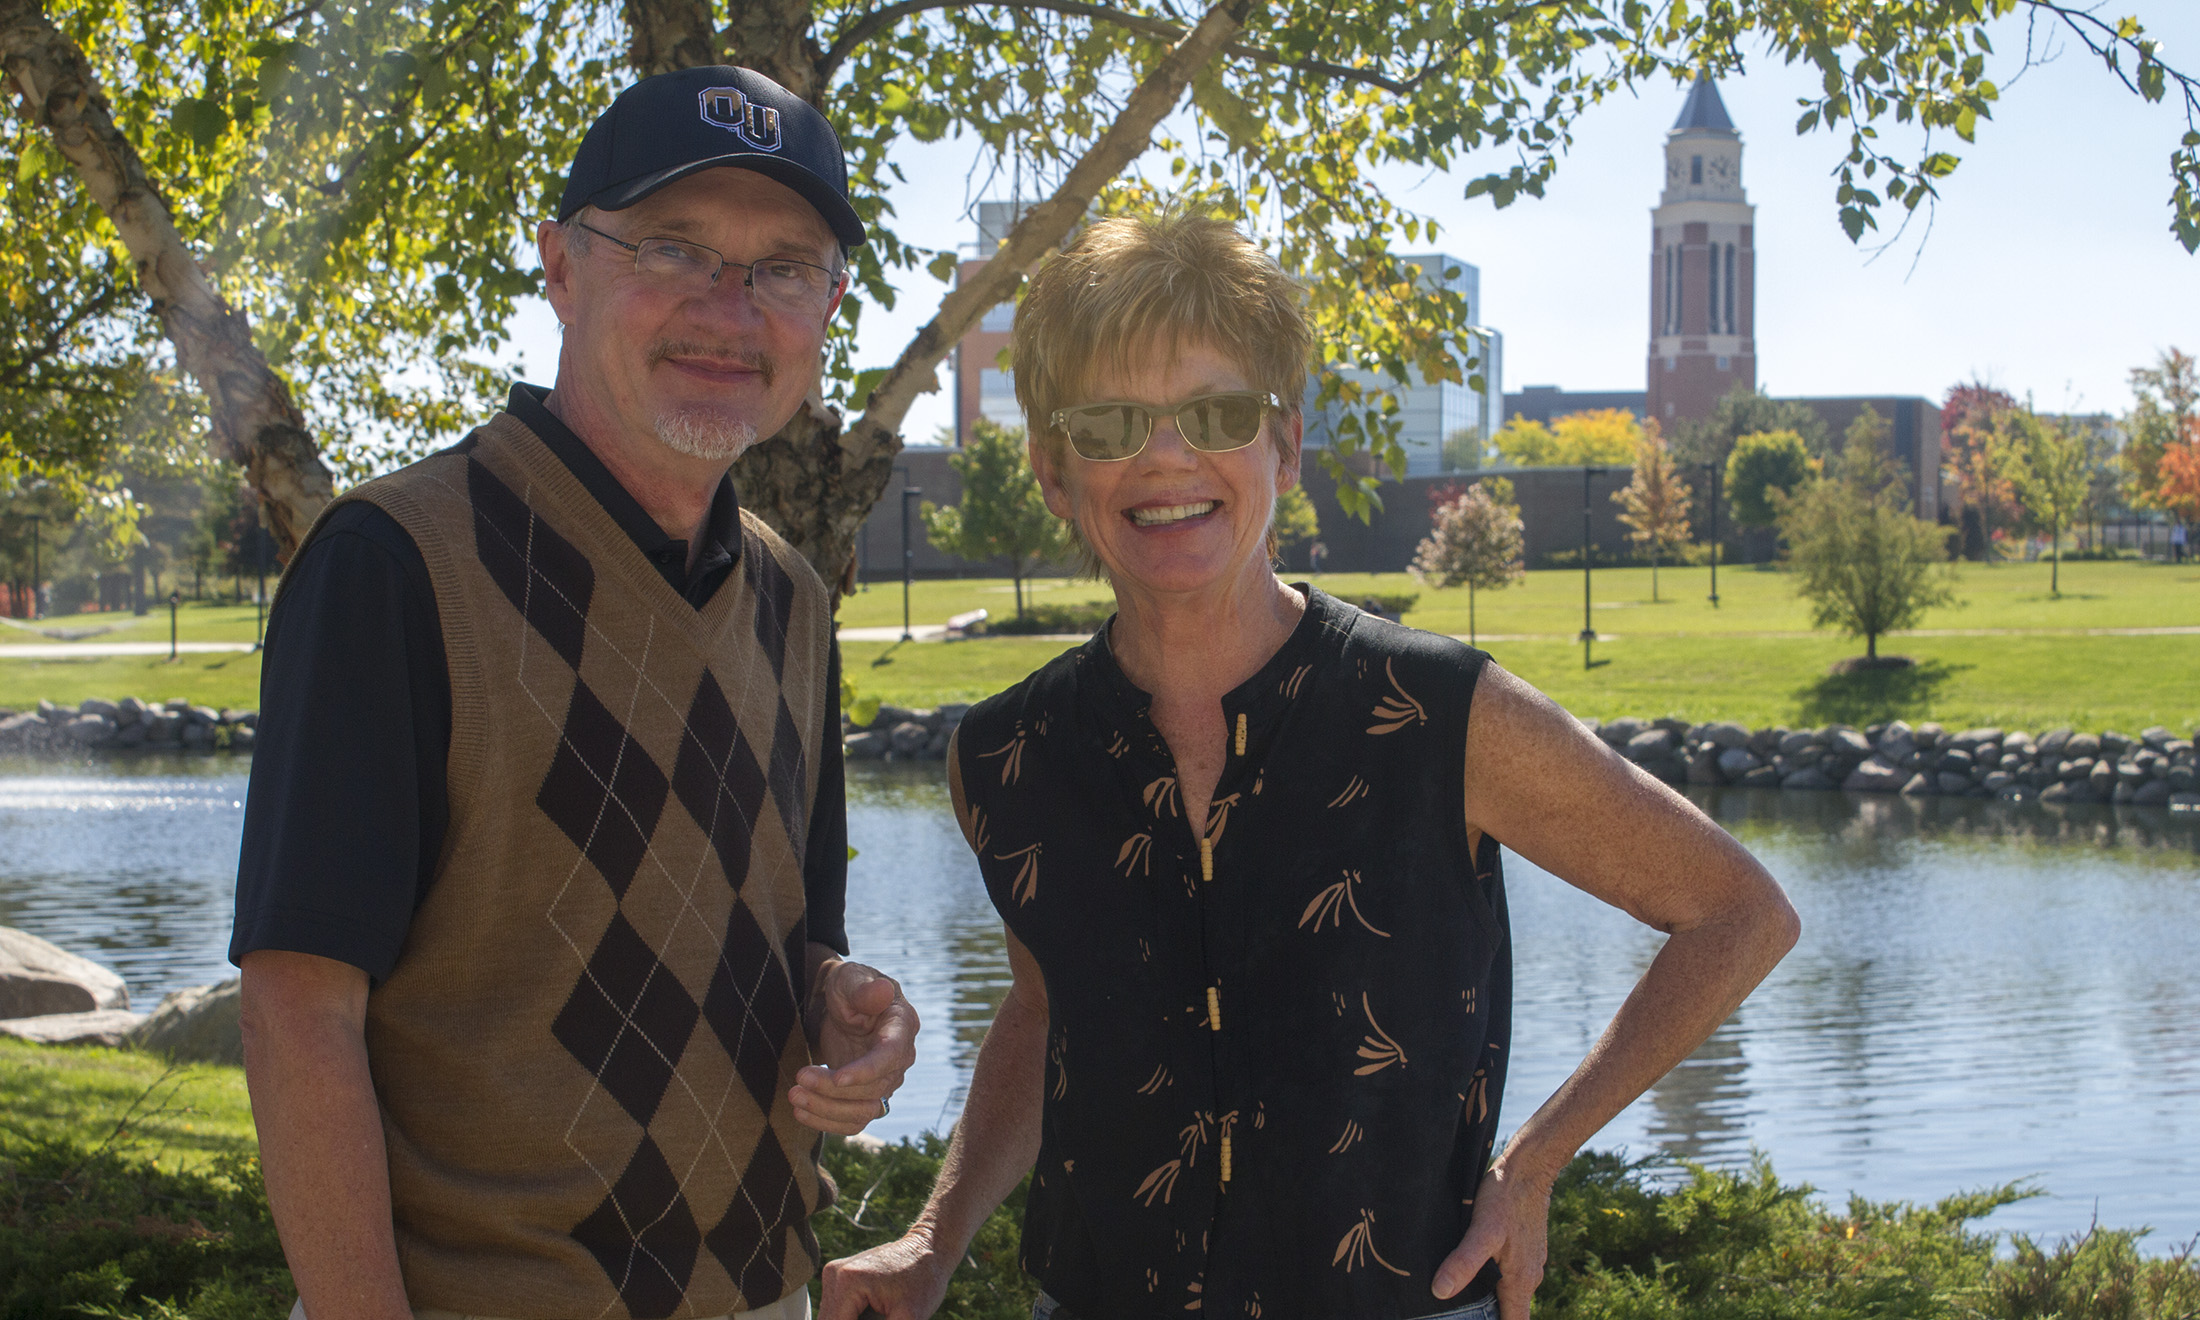 Photo os Garry Gilbert and Holly Gilbert standing next to lake with Oakland University campus in background